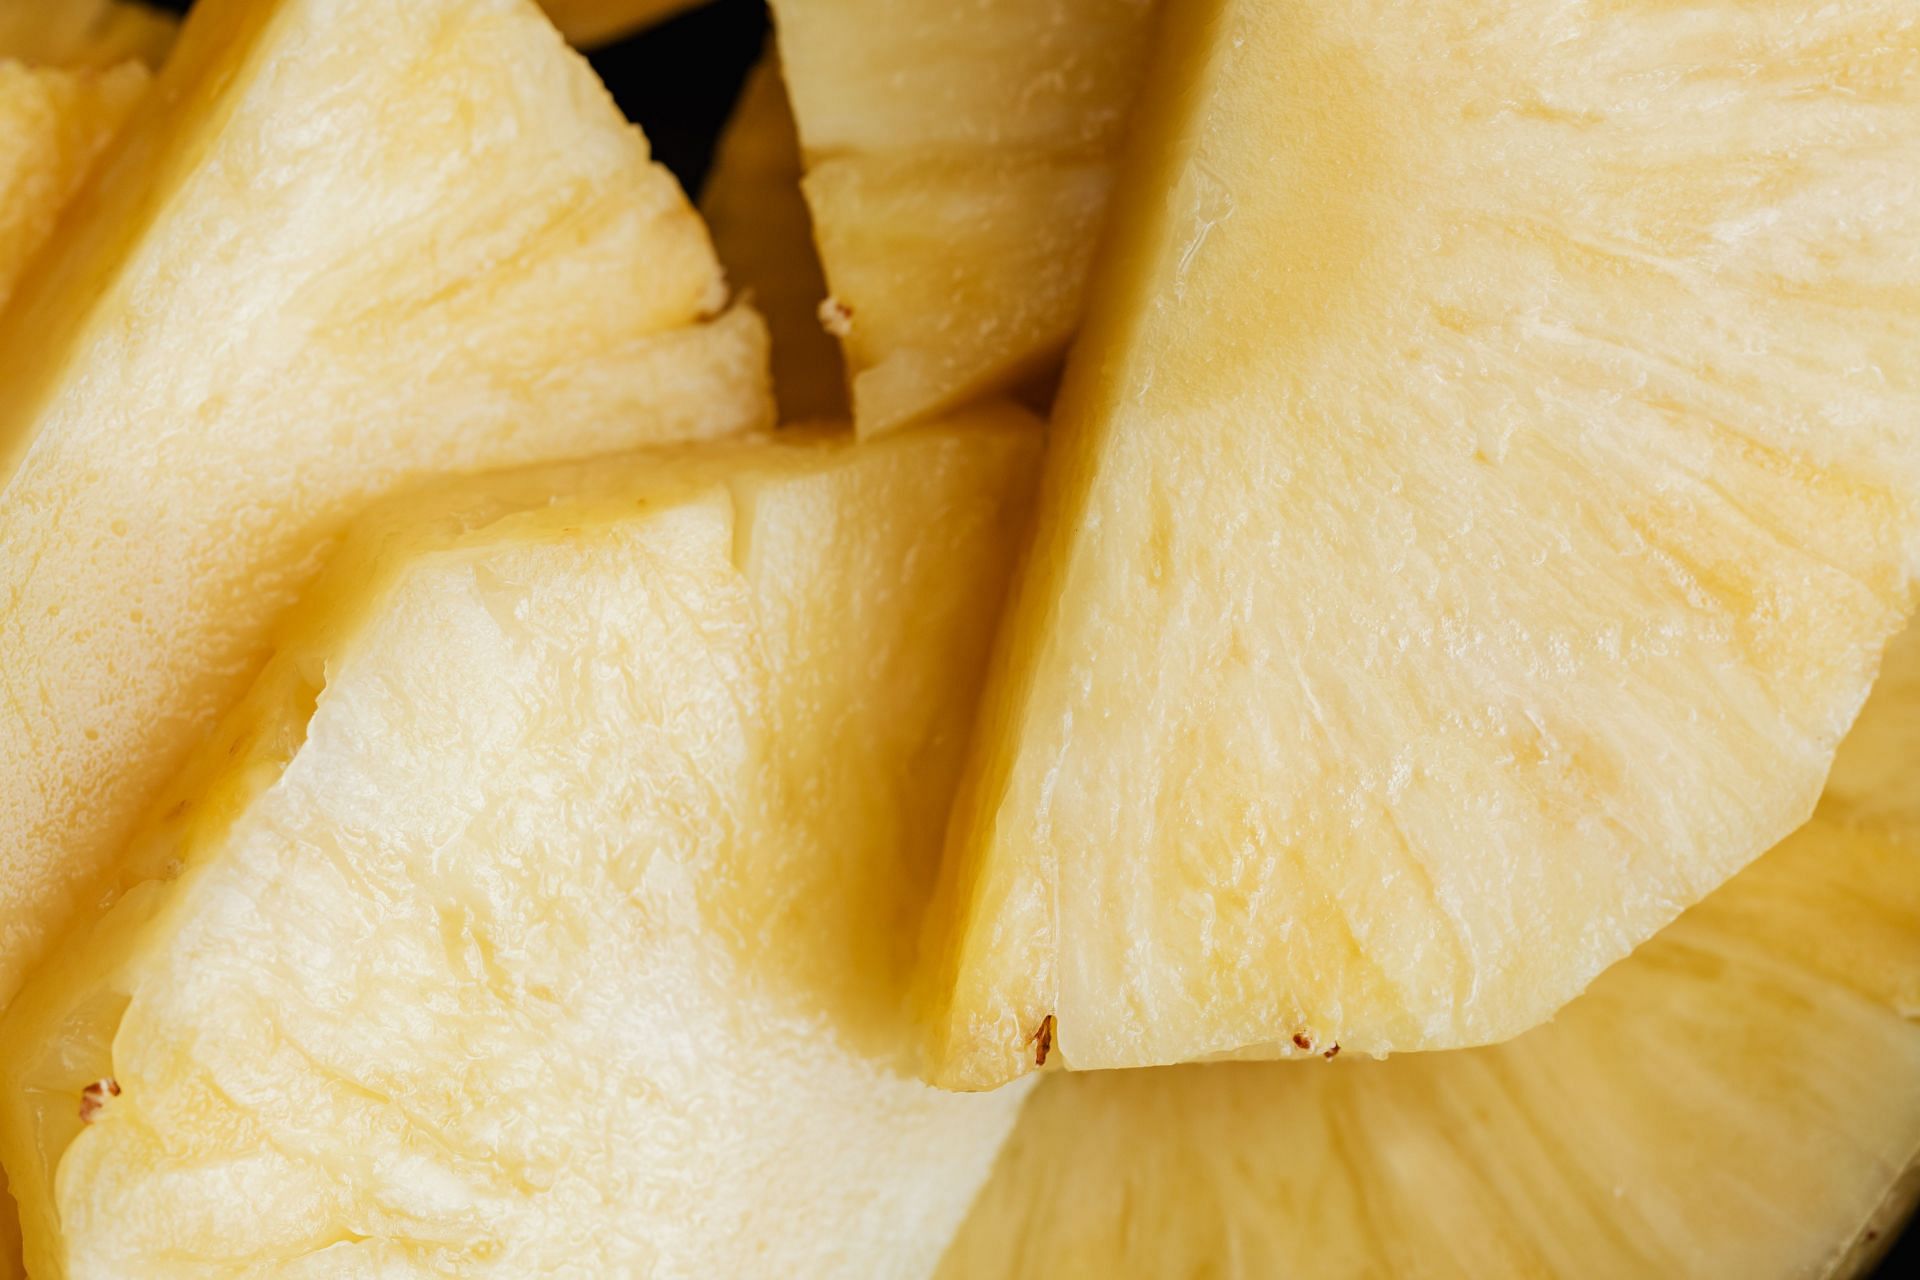 Pineapple contains bromelain, an enzyme with numerous health benefits (Image via Pexels)